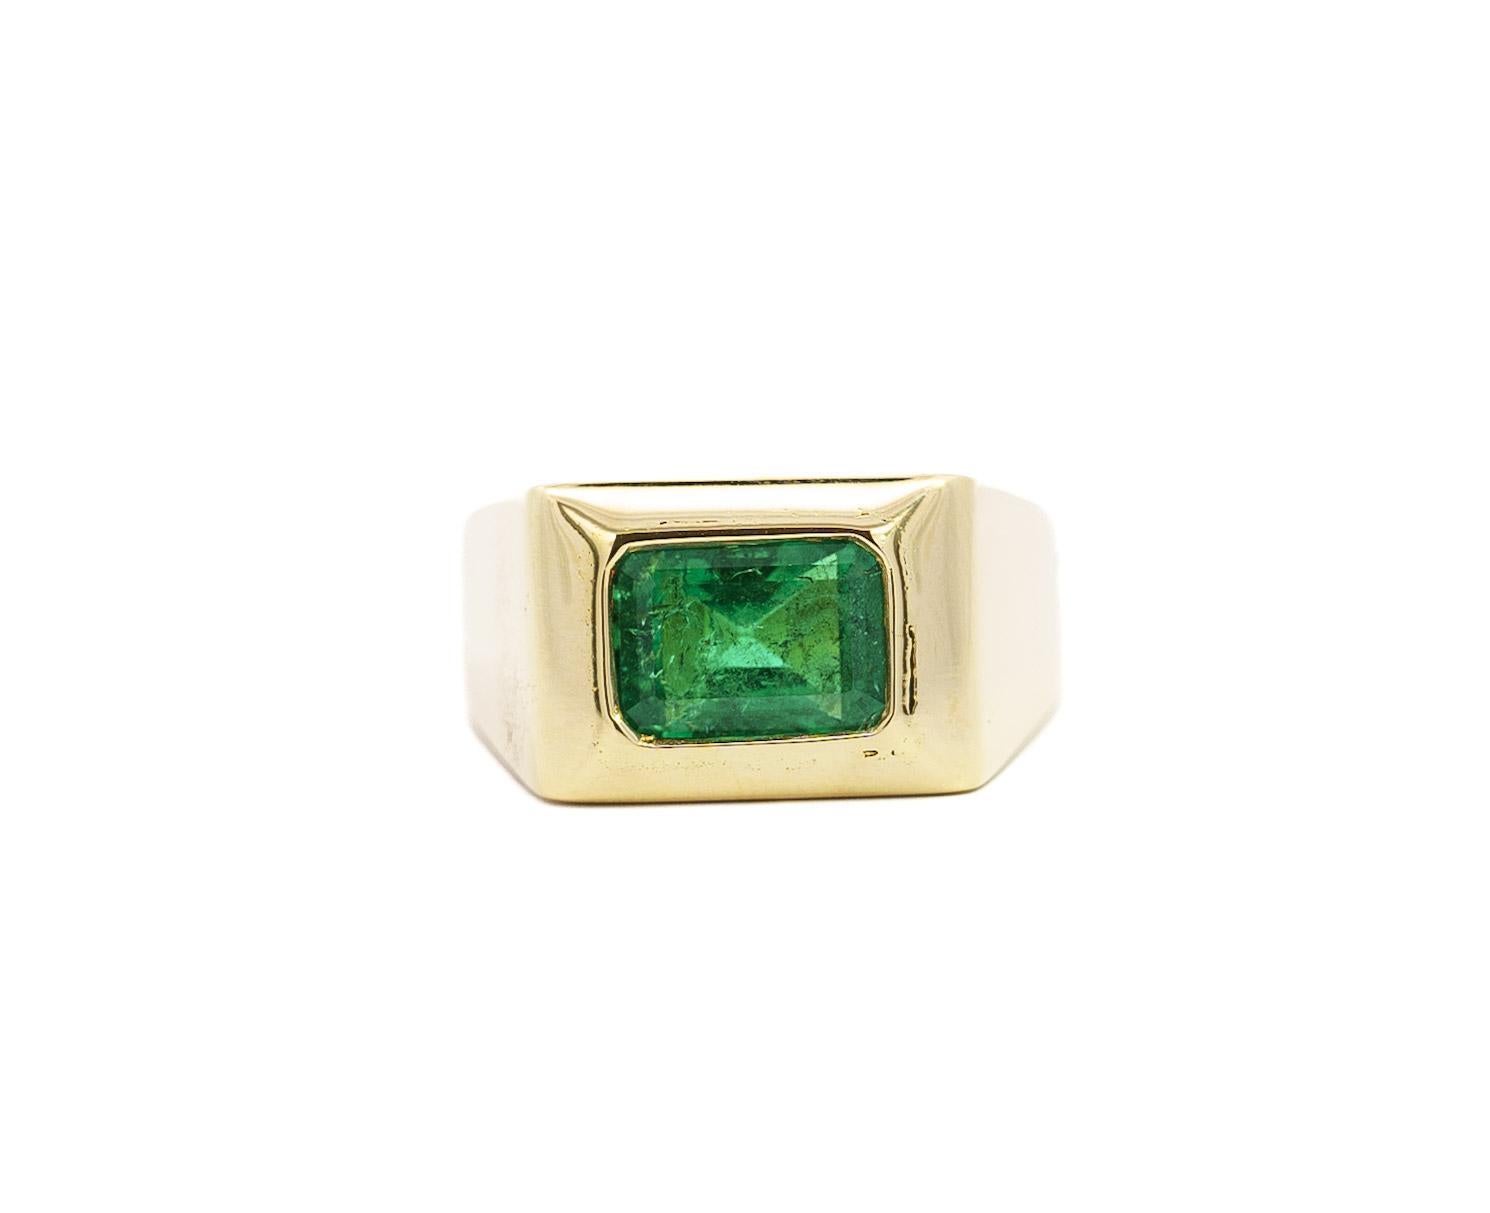 Vintage 18K Yellow Gold Solitaire Men's Ring, weighing 15.4 grams, the ring showcases a ~3.0 carat Emerald-Cut Emerald (10.65 x 7.6 x 6.1mm) in a bezel setting. A simple and classy ring that is noticeably valuable. 

The emerald features a darker